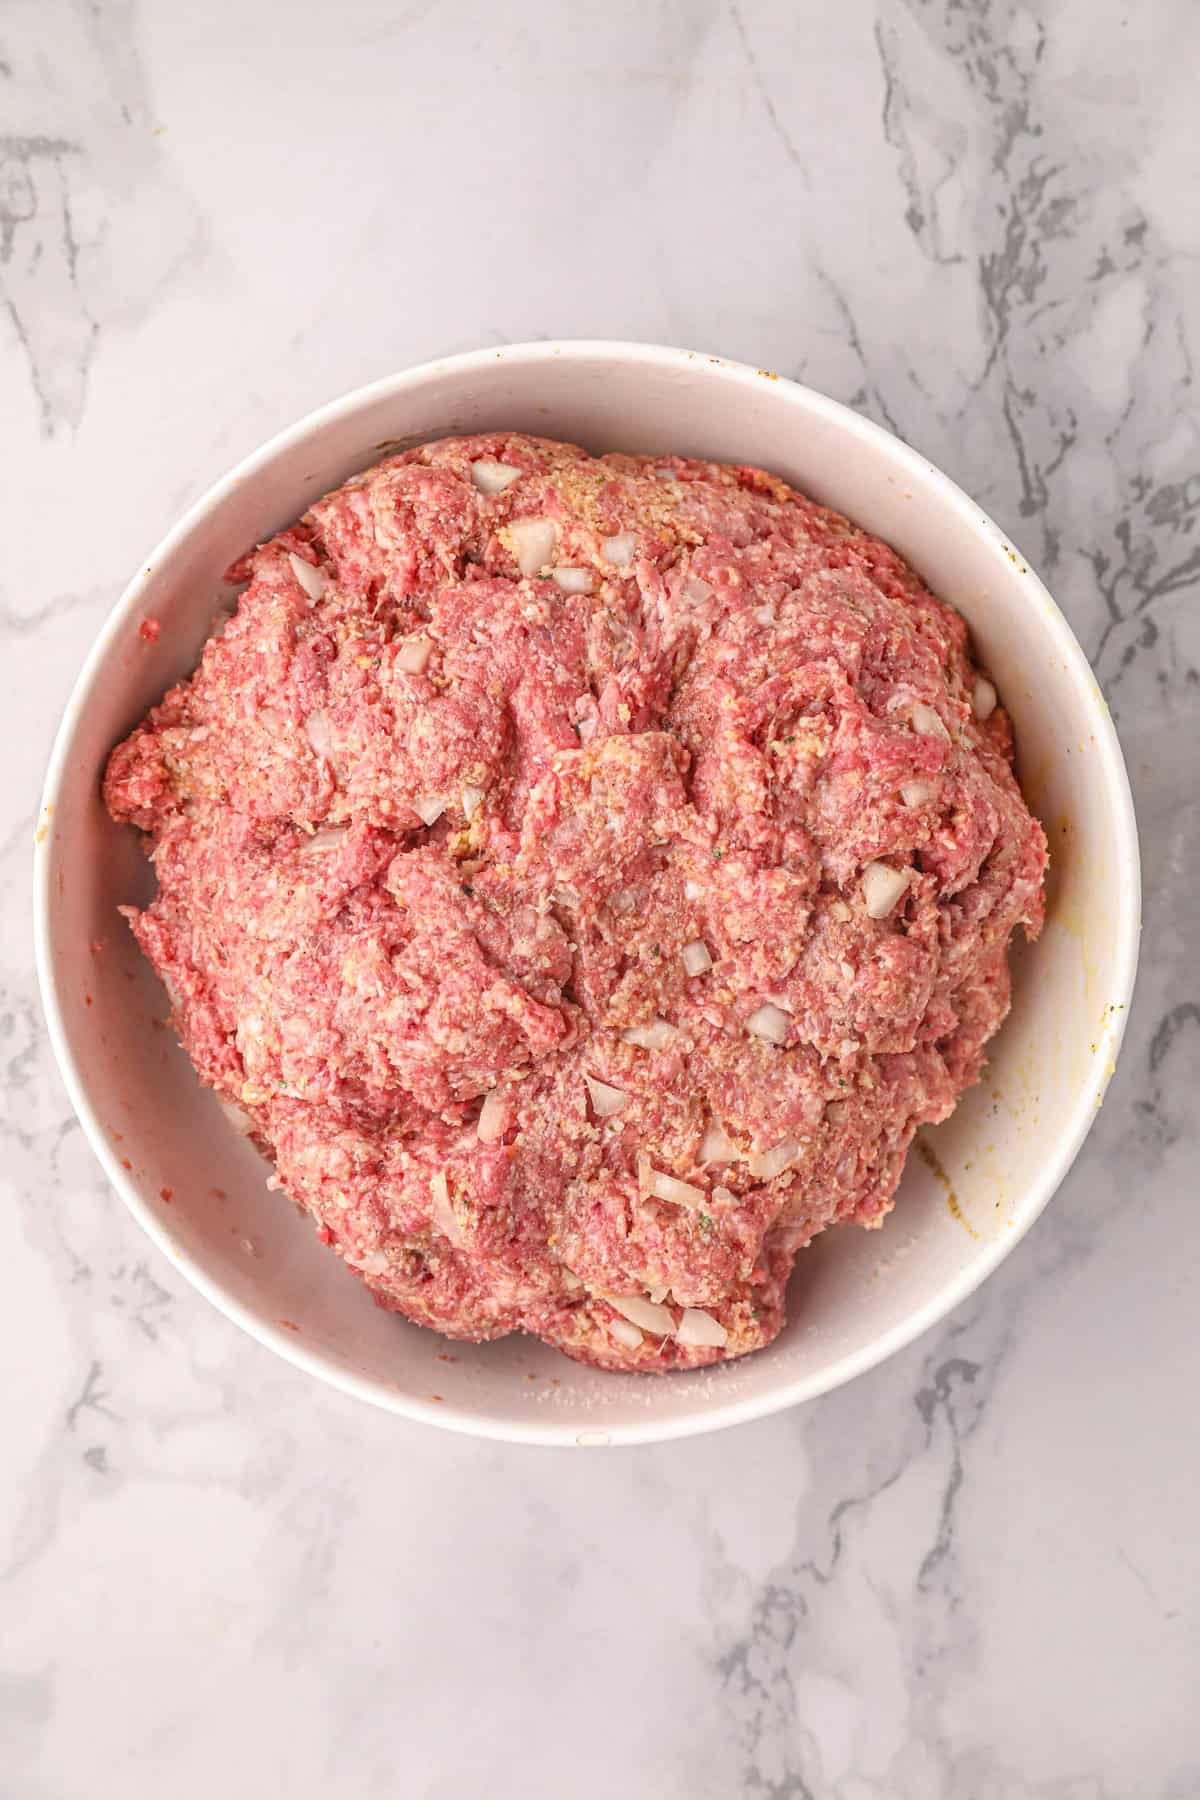 Combined meatball ingredients in mixing bowl for Smoked Stuffed Meatballs